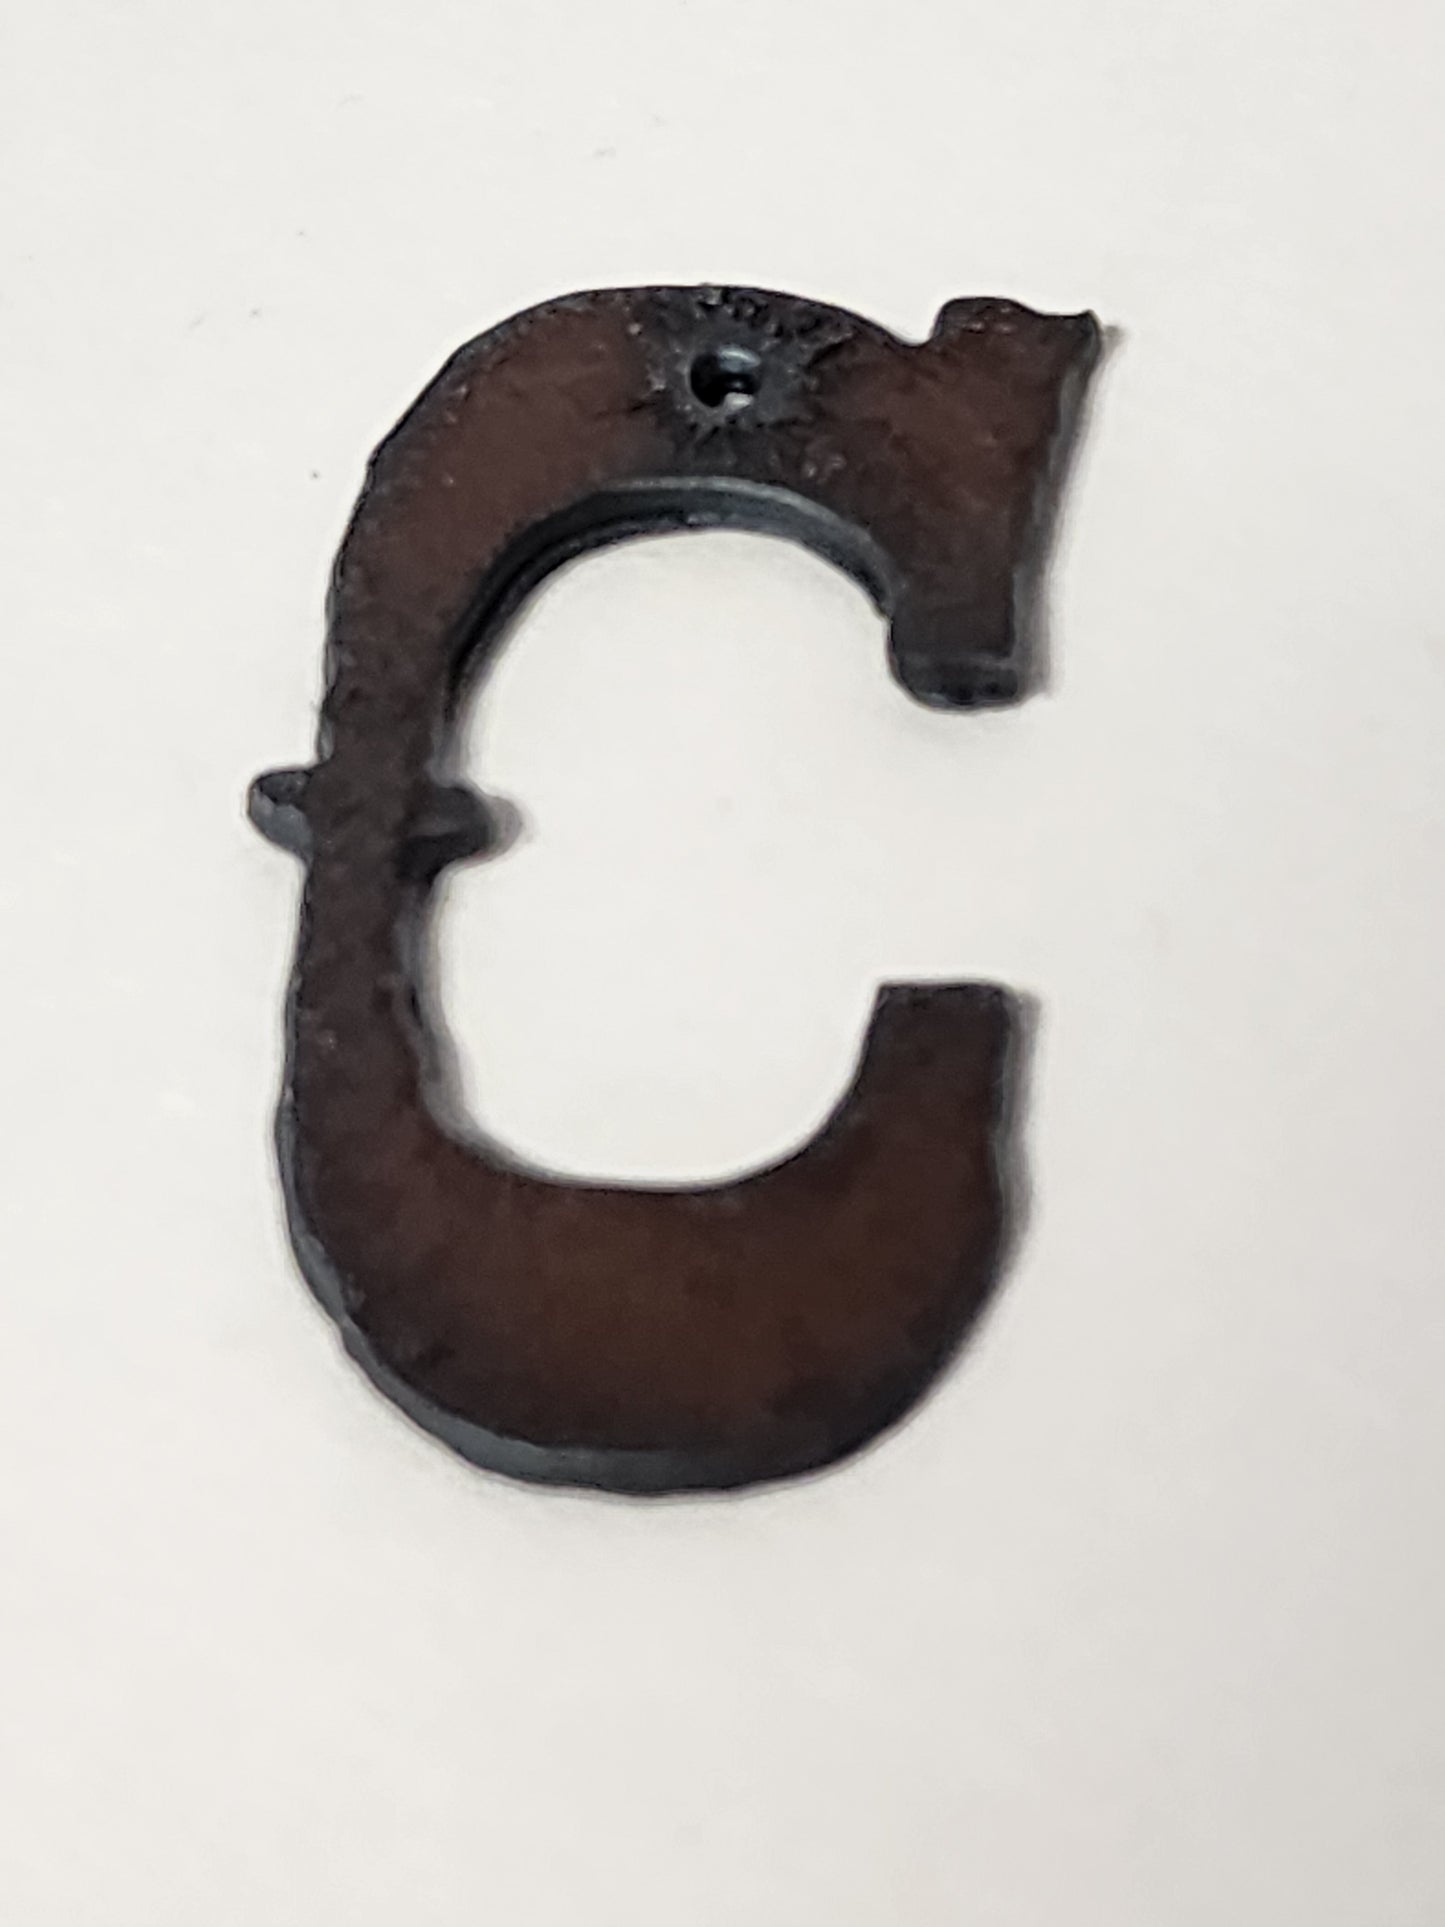 "Western" font Initial Charm